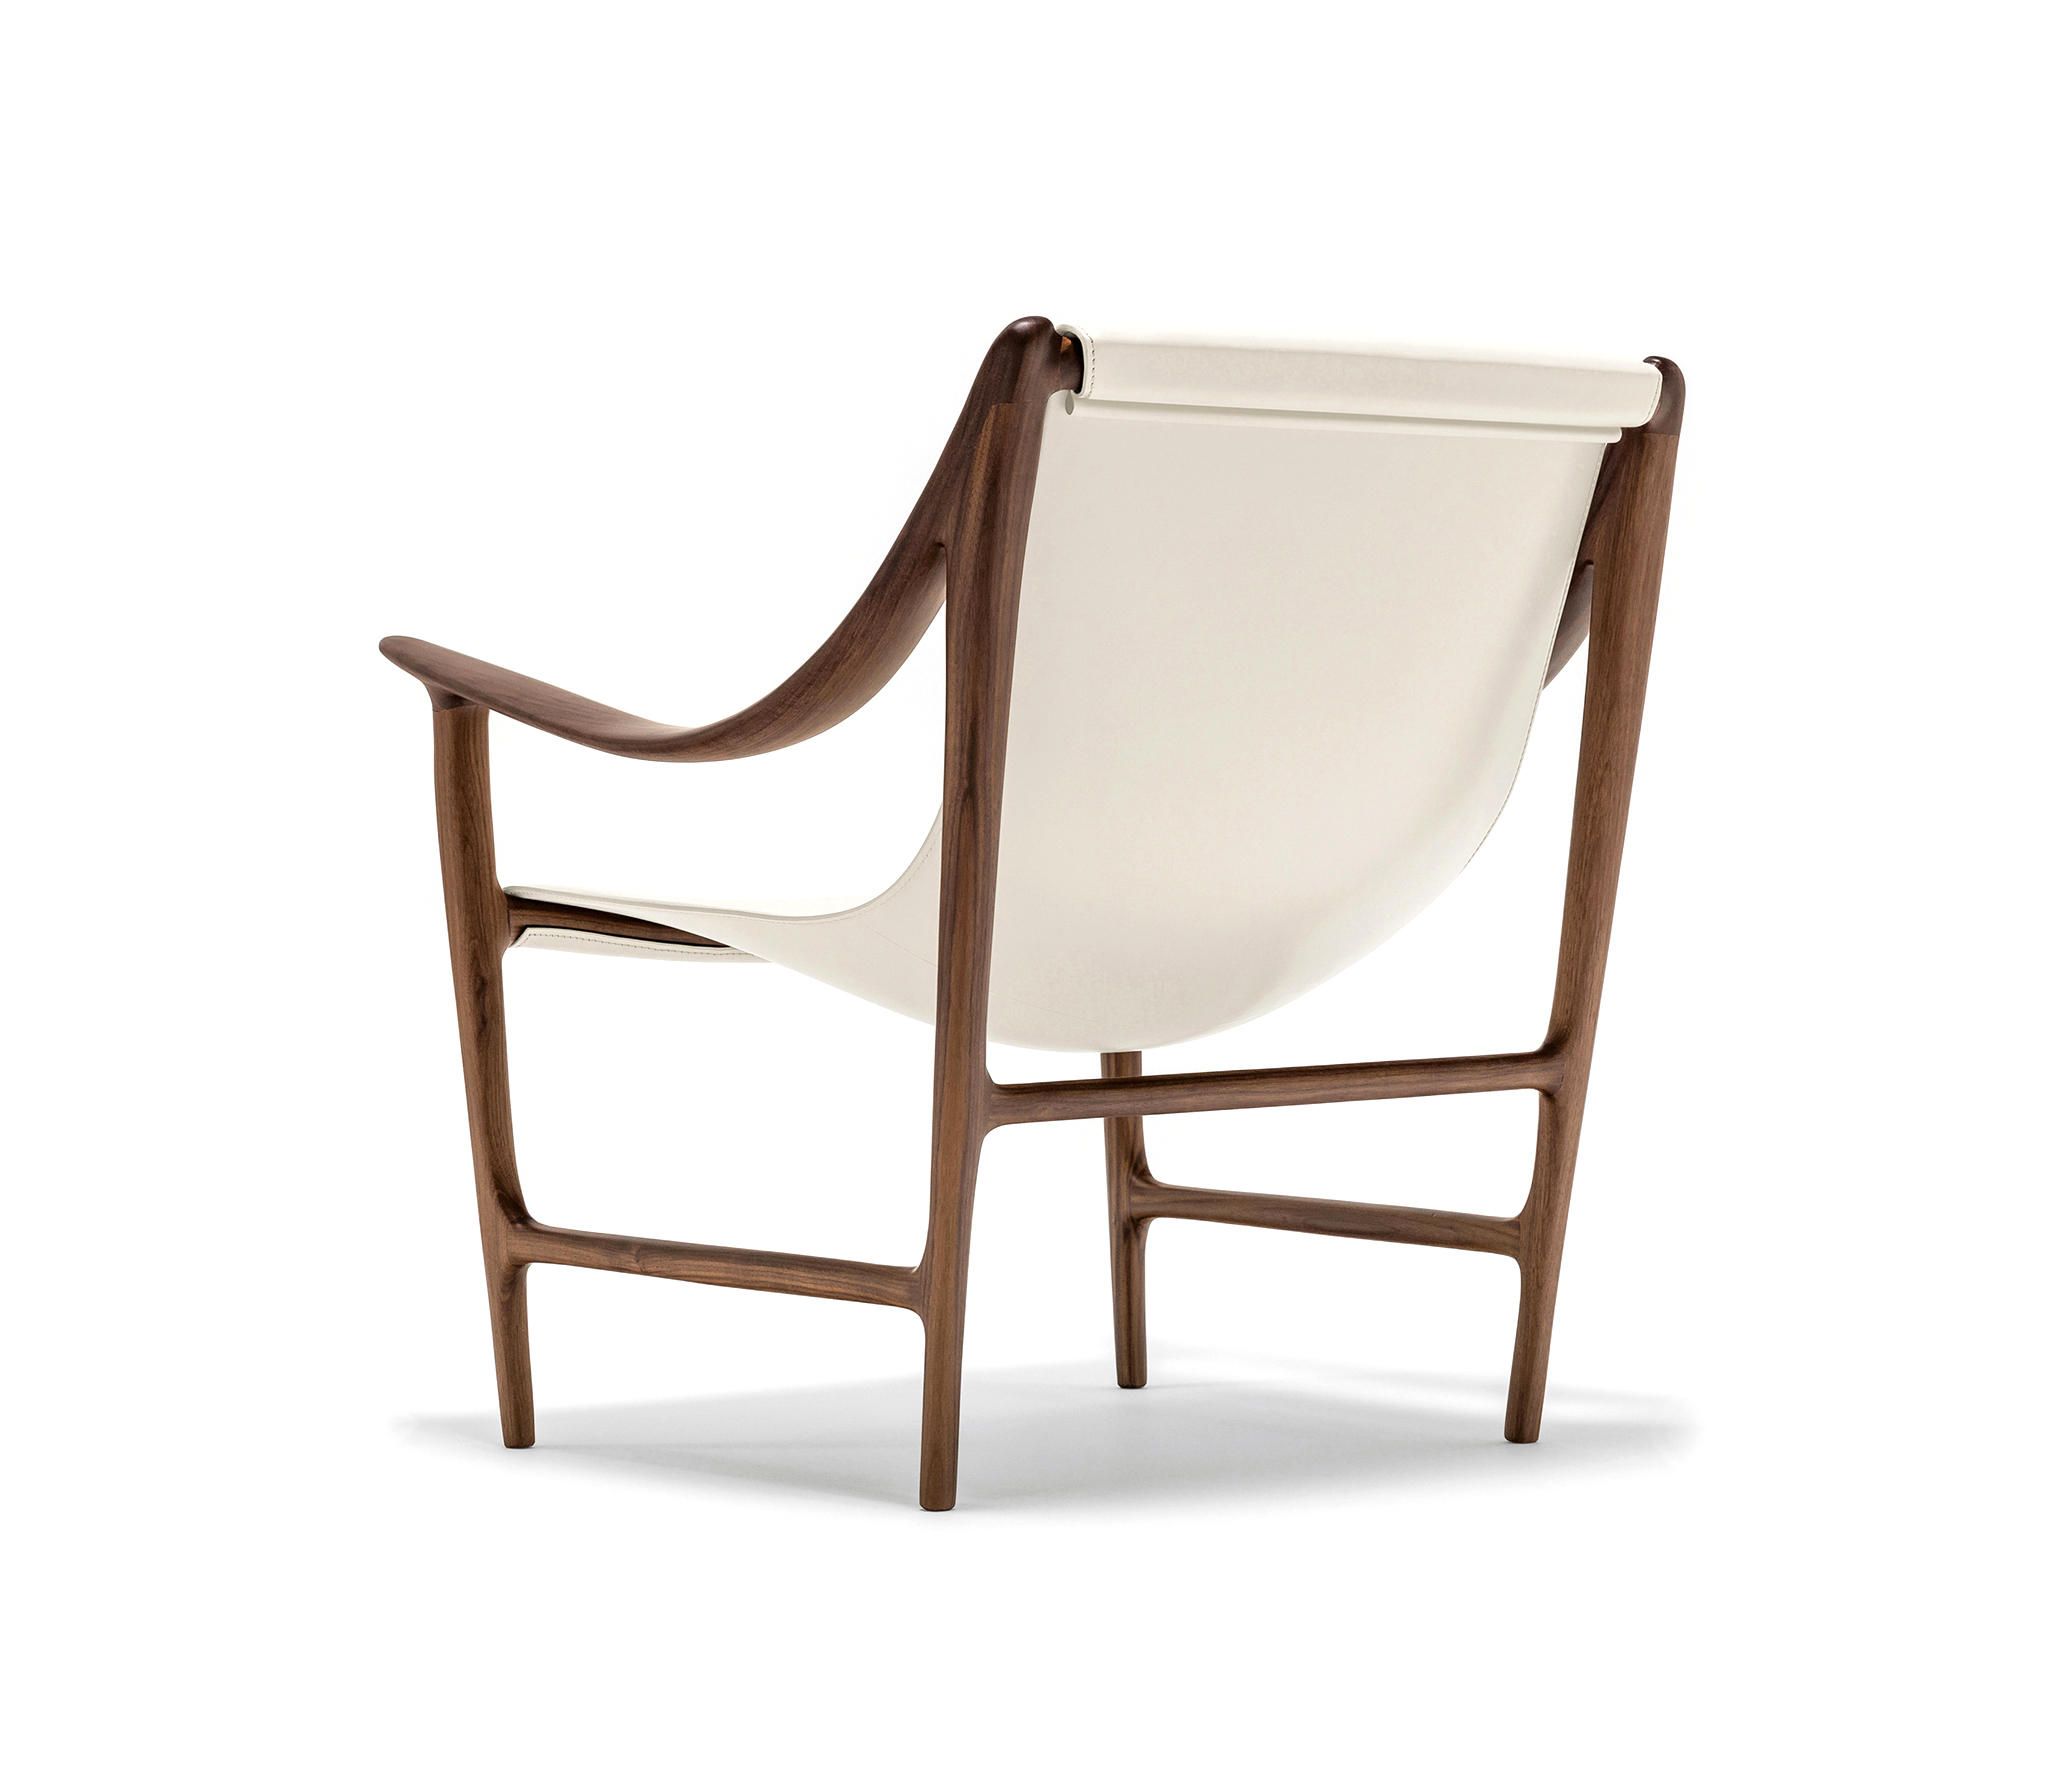 Giorgetti Swing Armchair by Carlo Colombo at 1stdibs